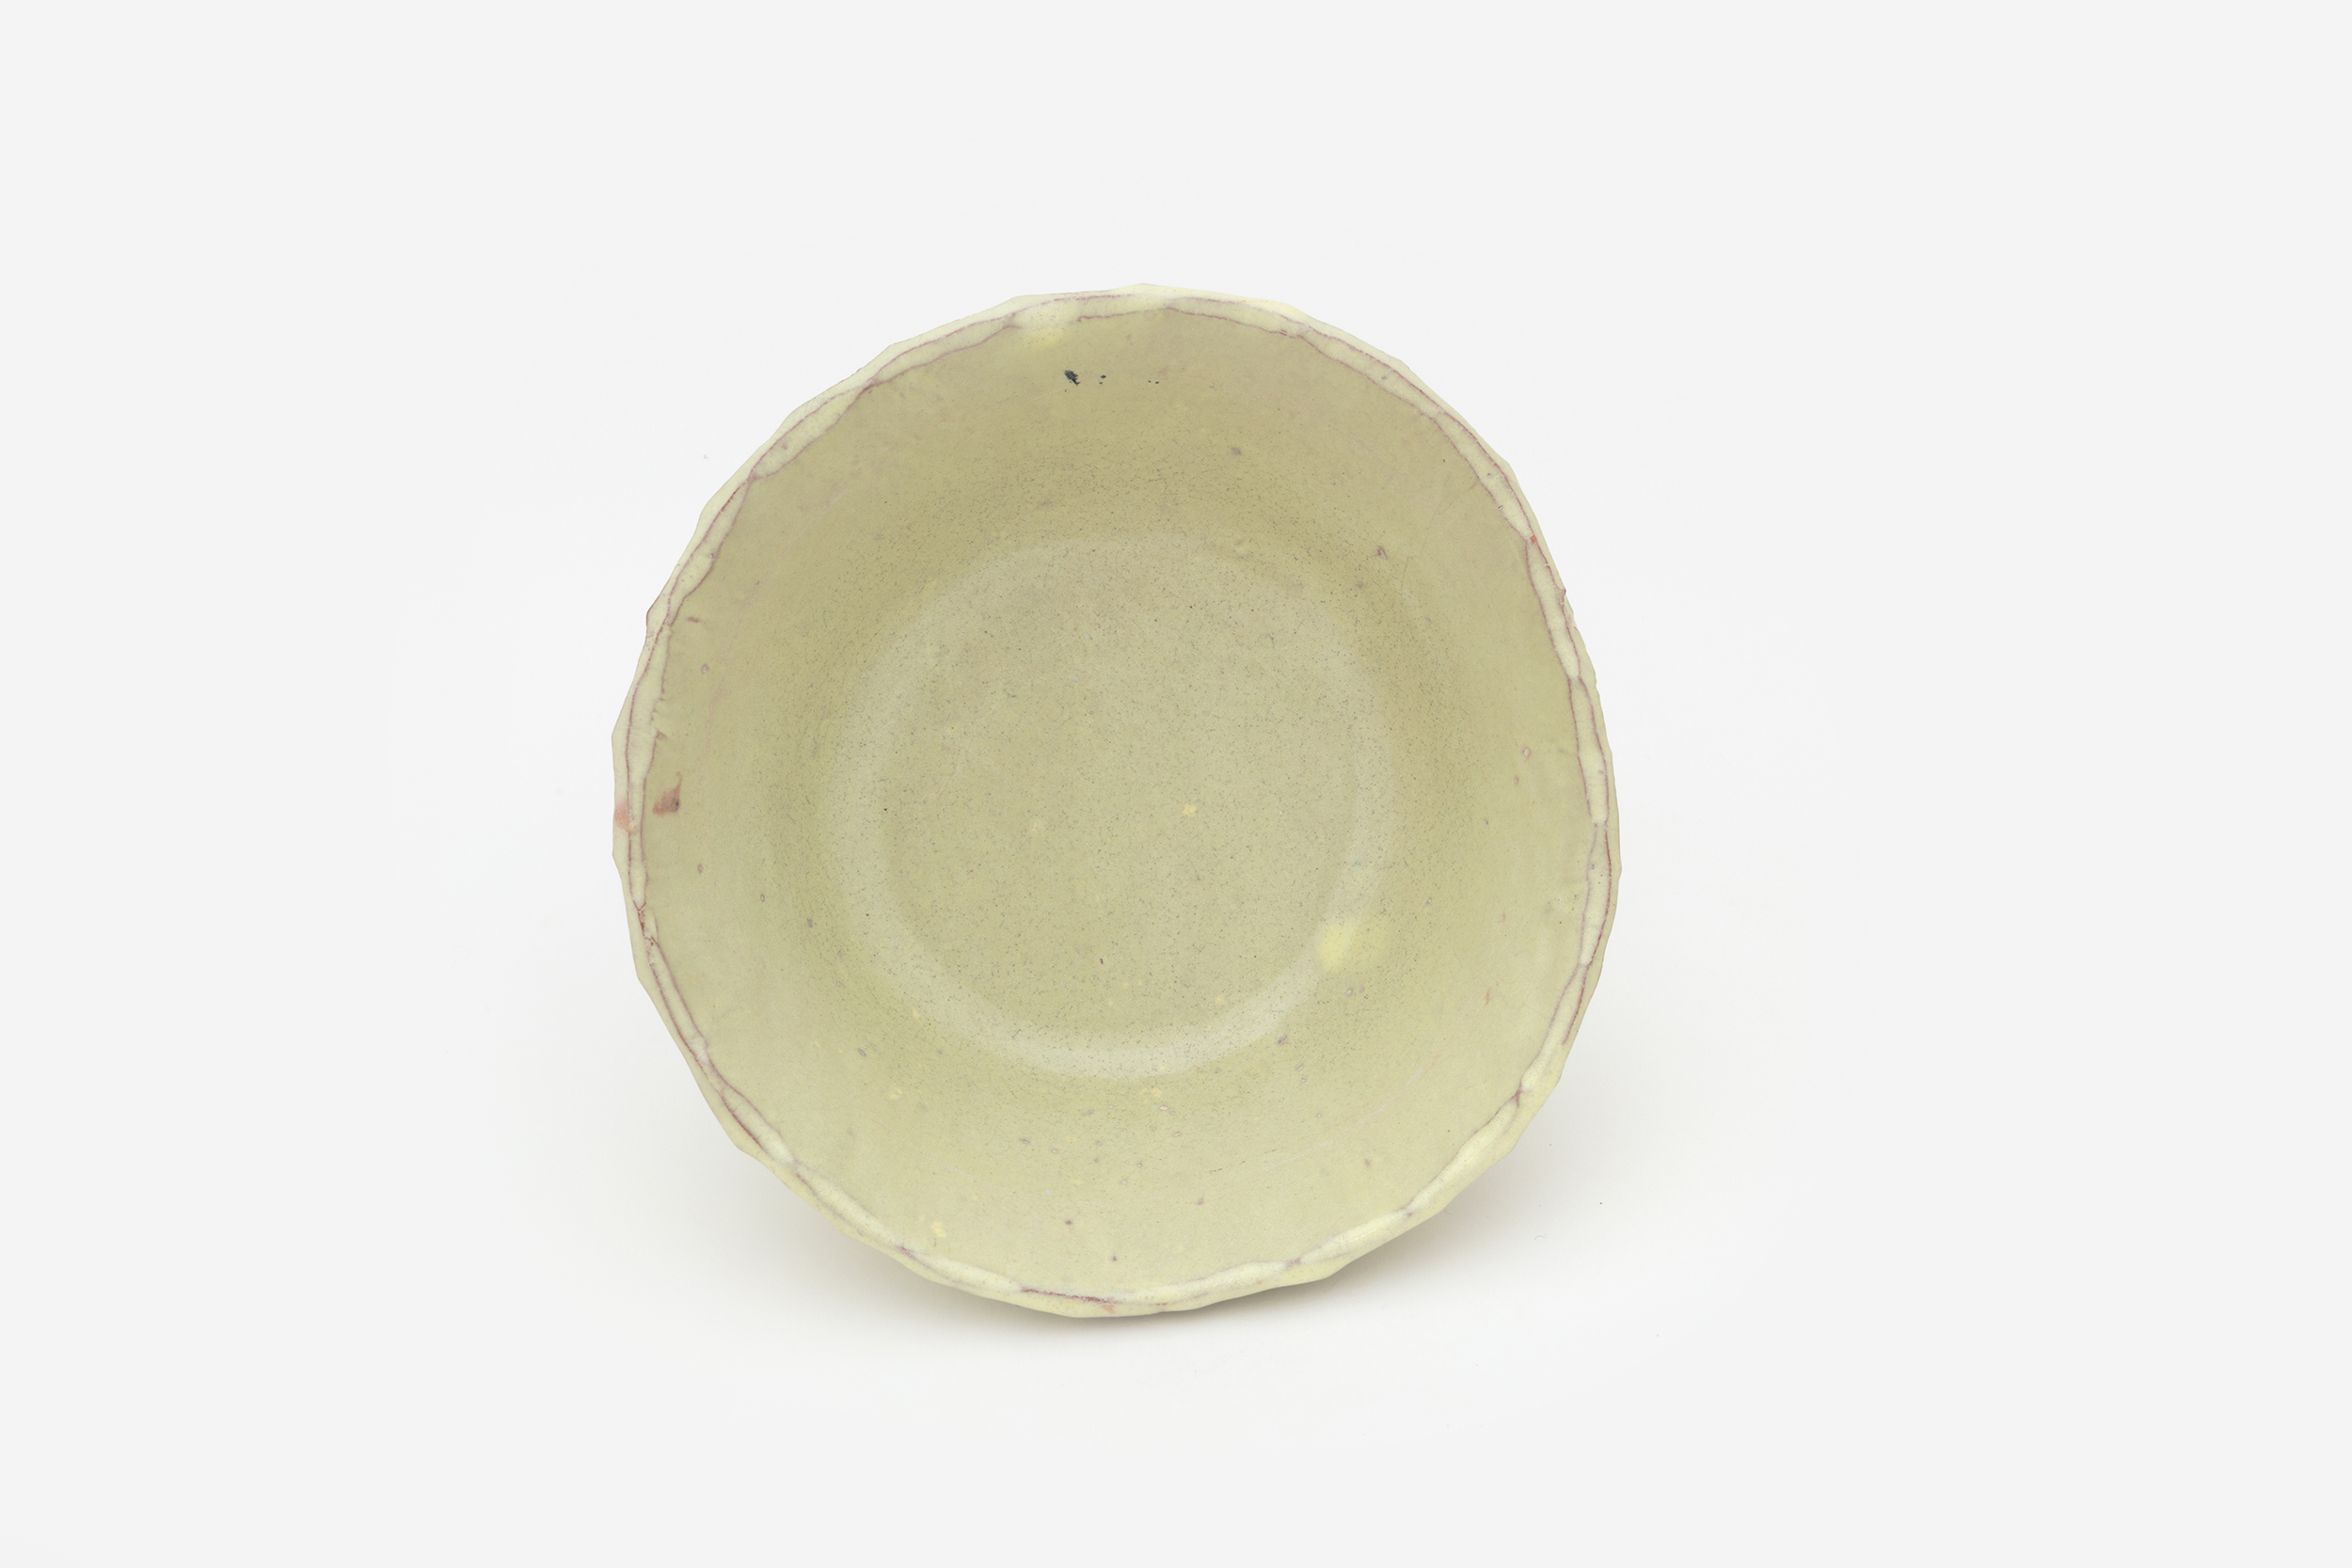 Hylton Nel - Yellowish bowl with carved edging, 